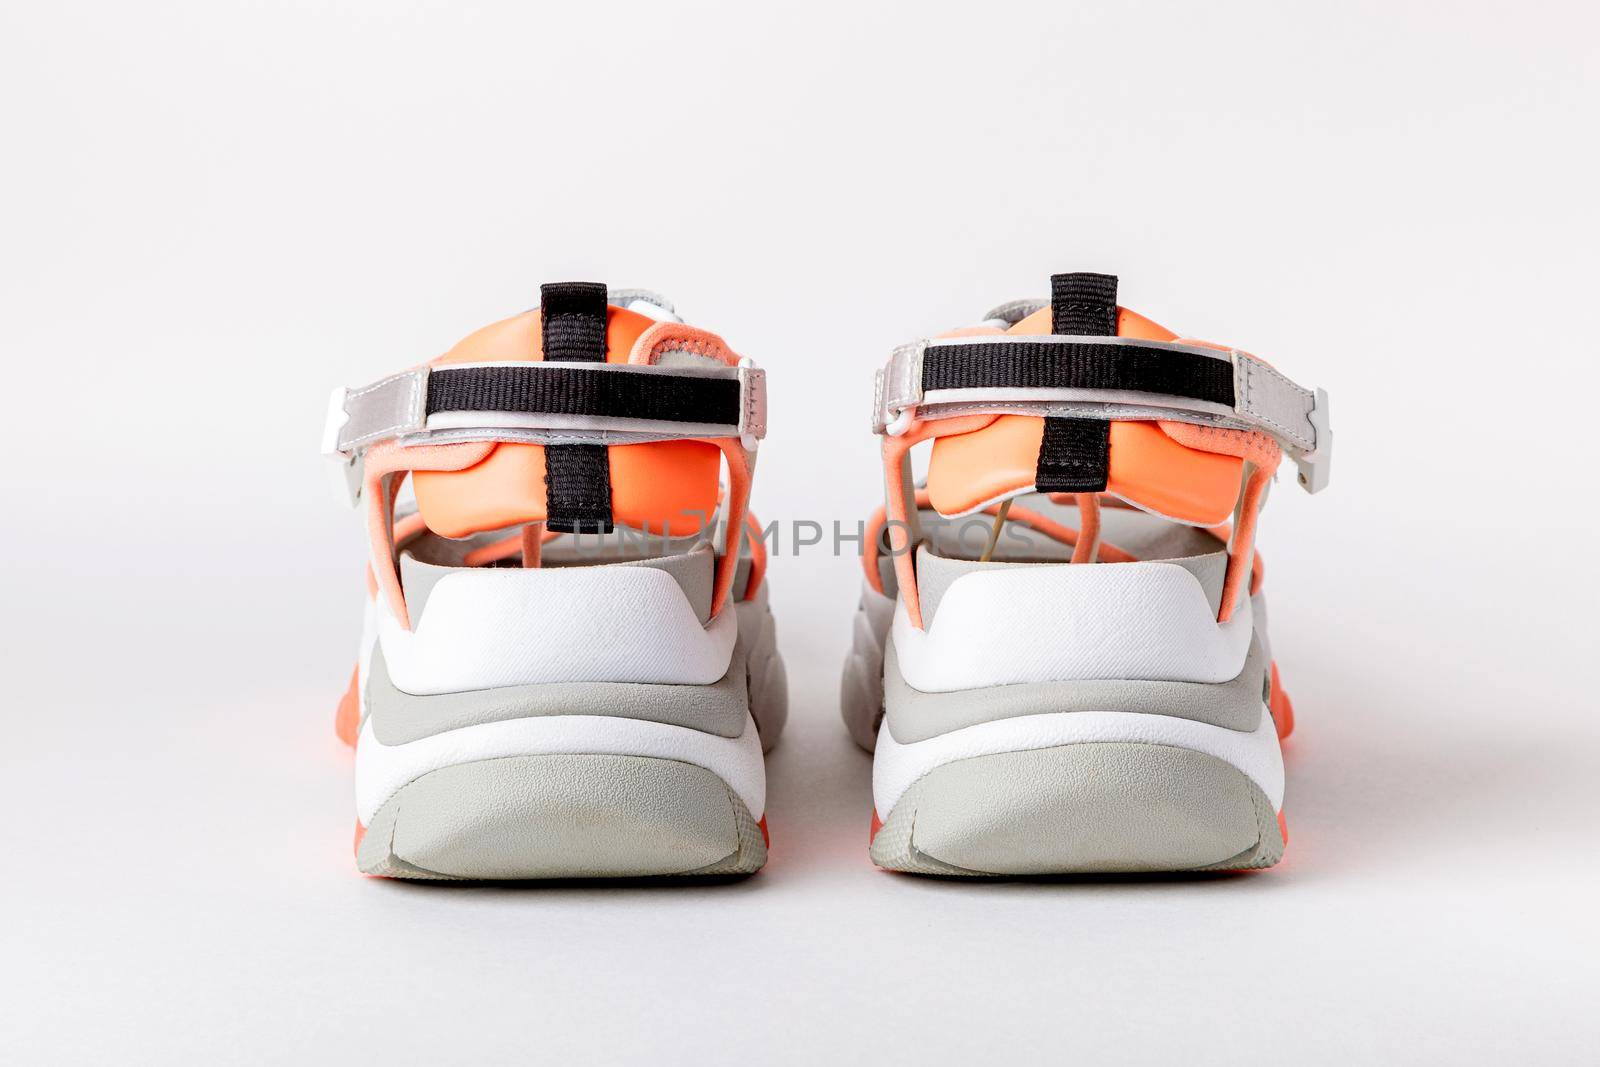 Women's, fashionable, sports sandals with orange accents on a white background. by Yurich32